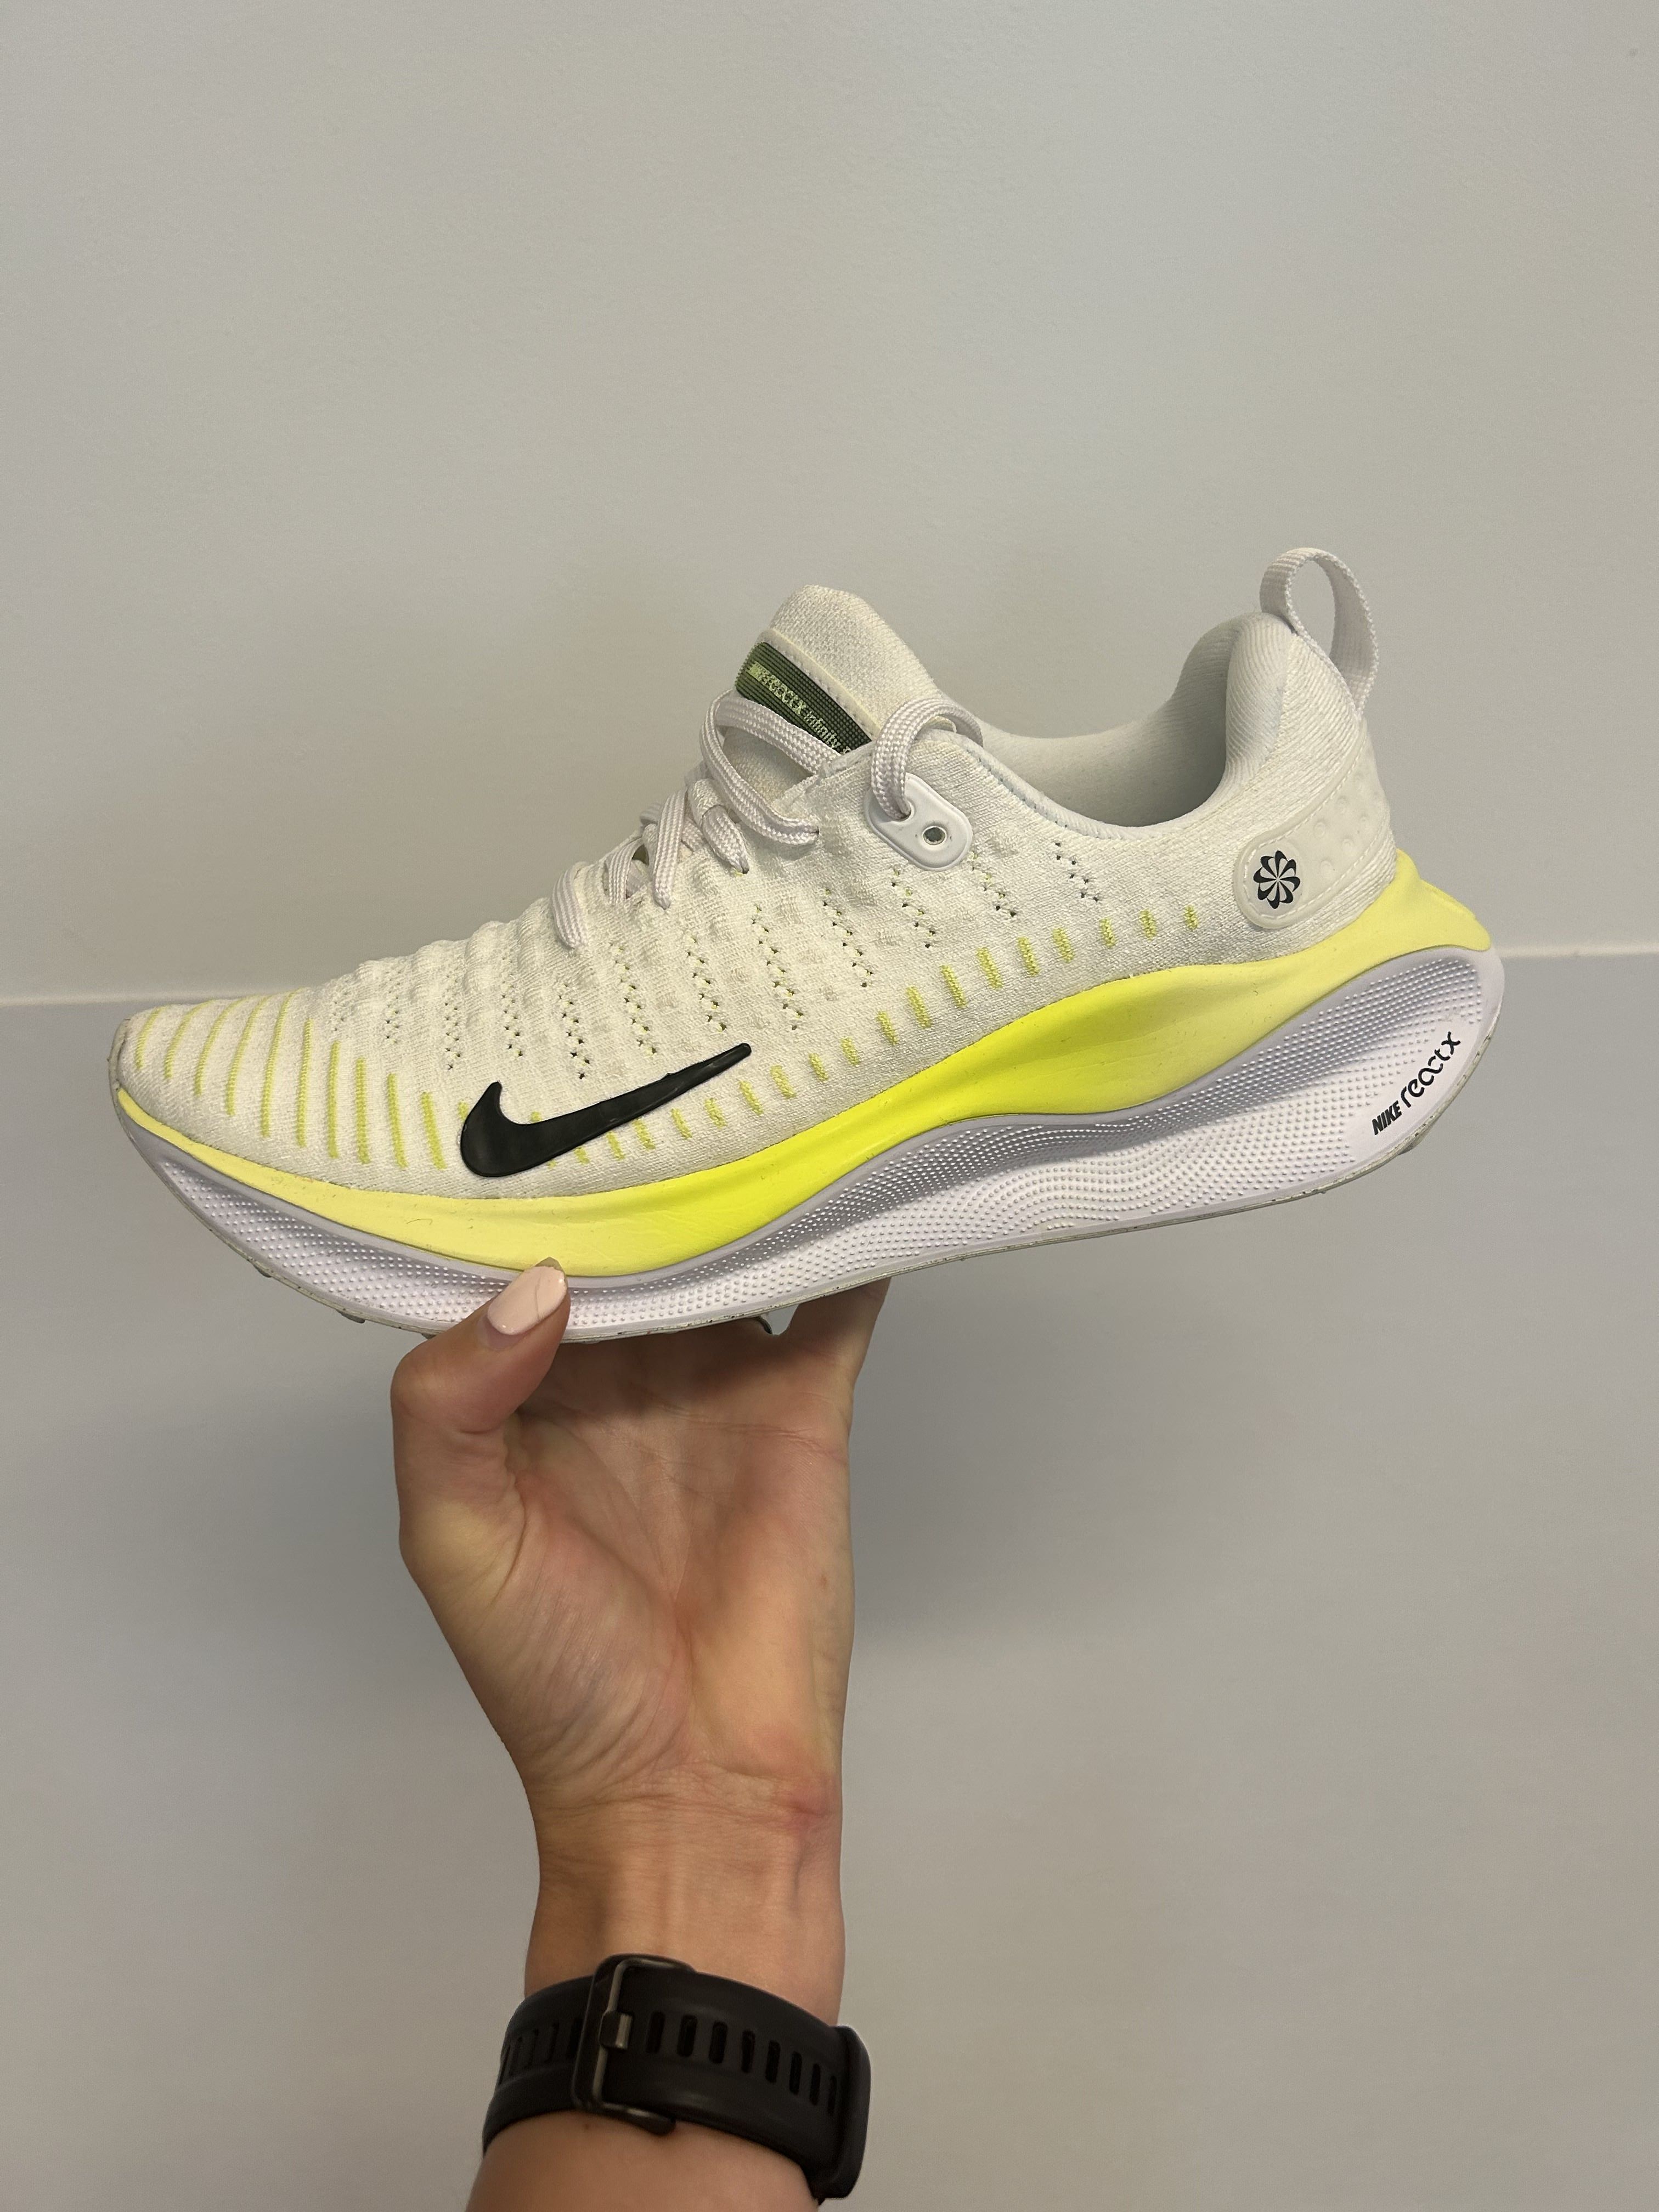 Share more than 145 nike infinity run shoes latest - kenmei.edu.vn